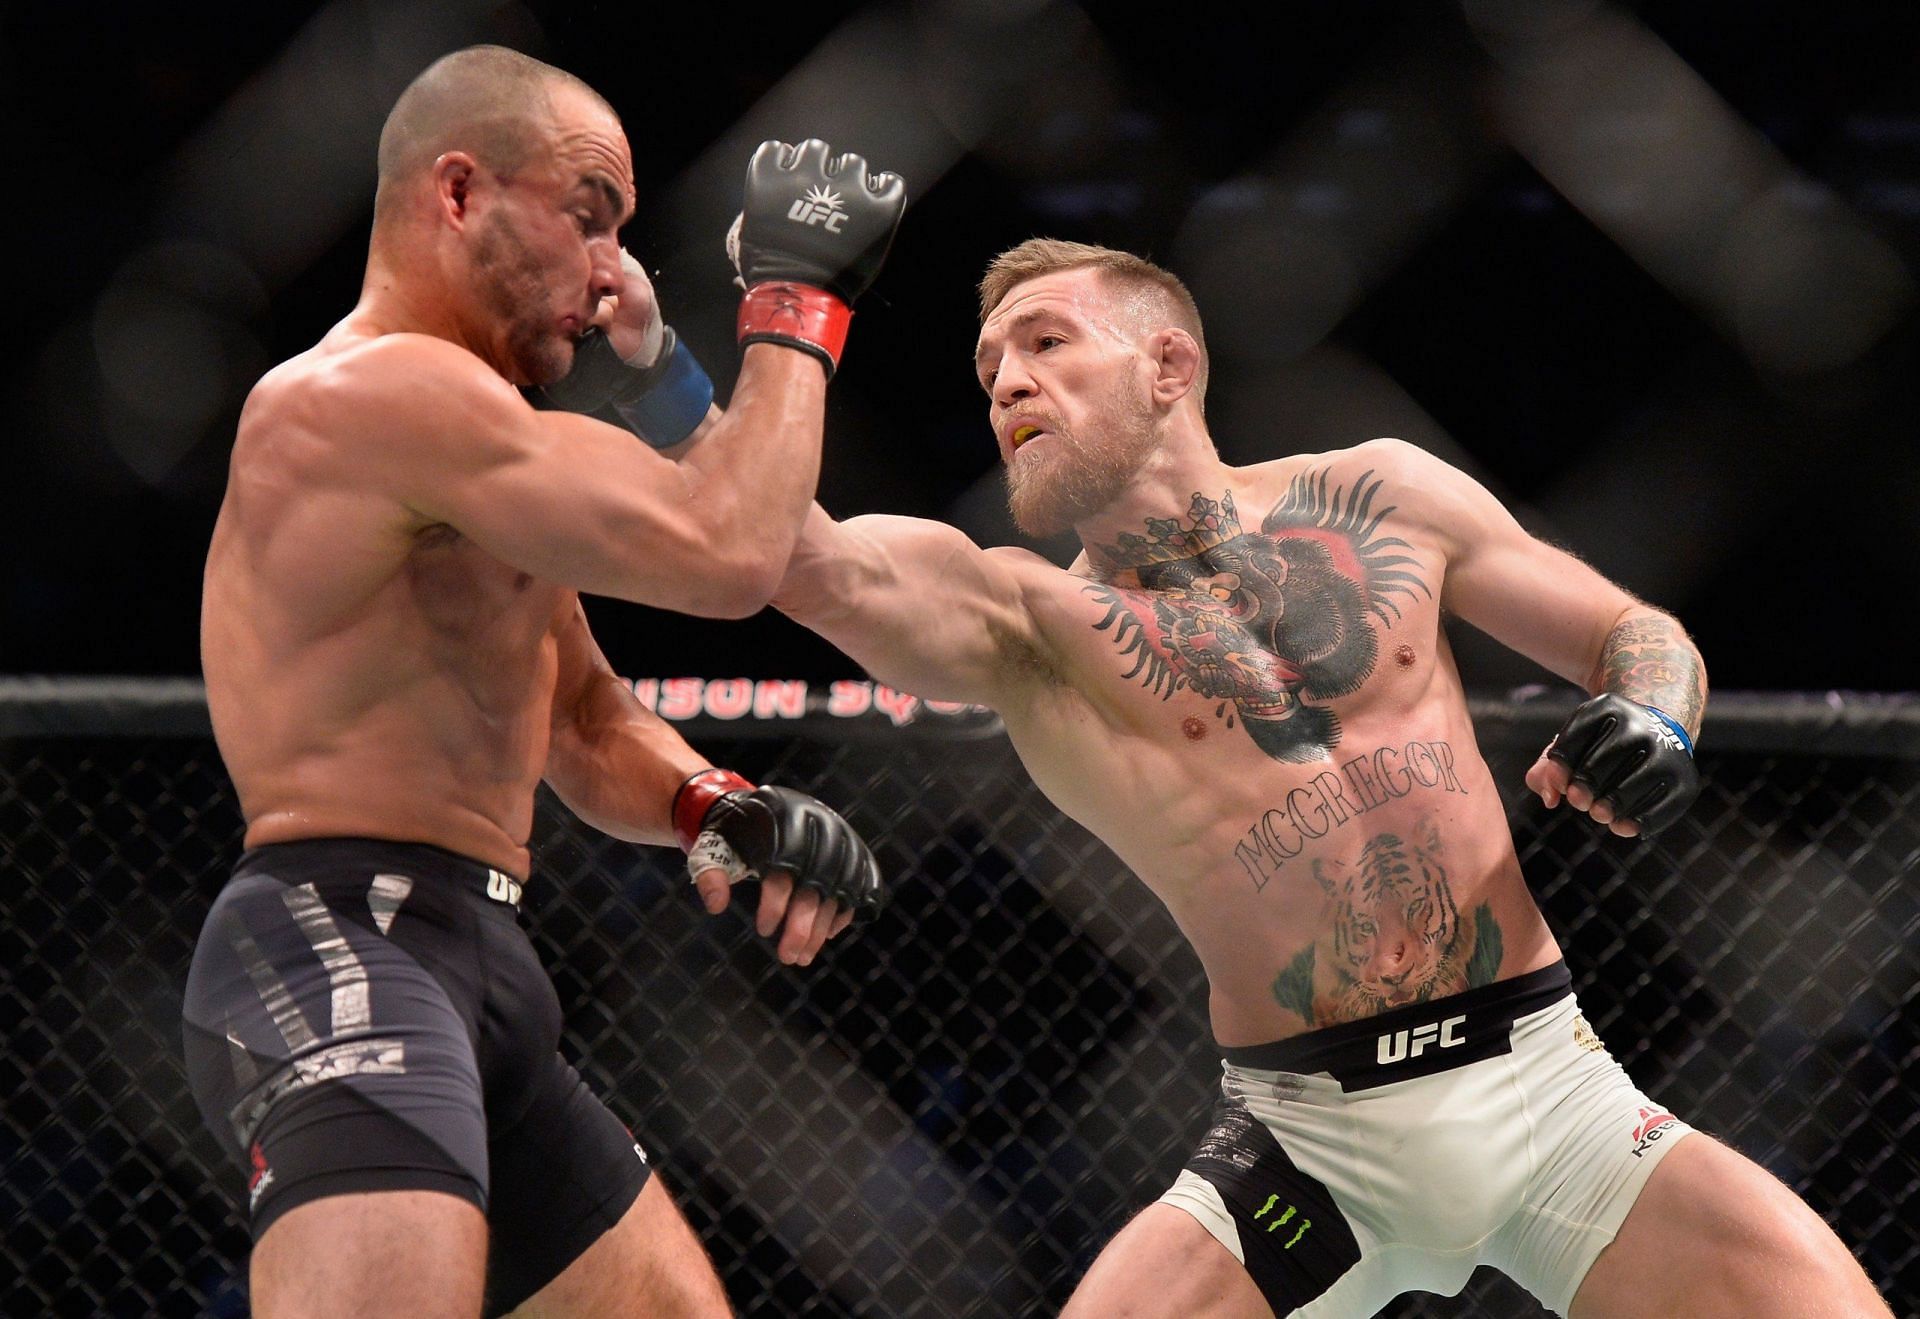 Conor McGregor basically embarrassed Eddie Alvarez in their famous title bout